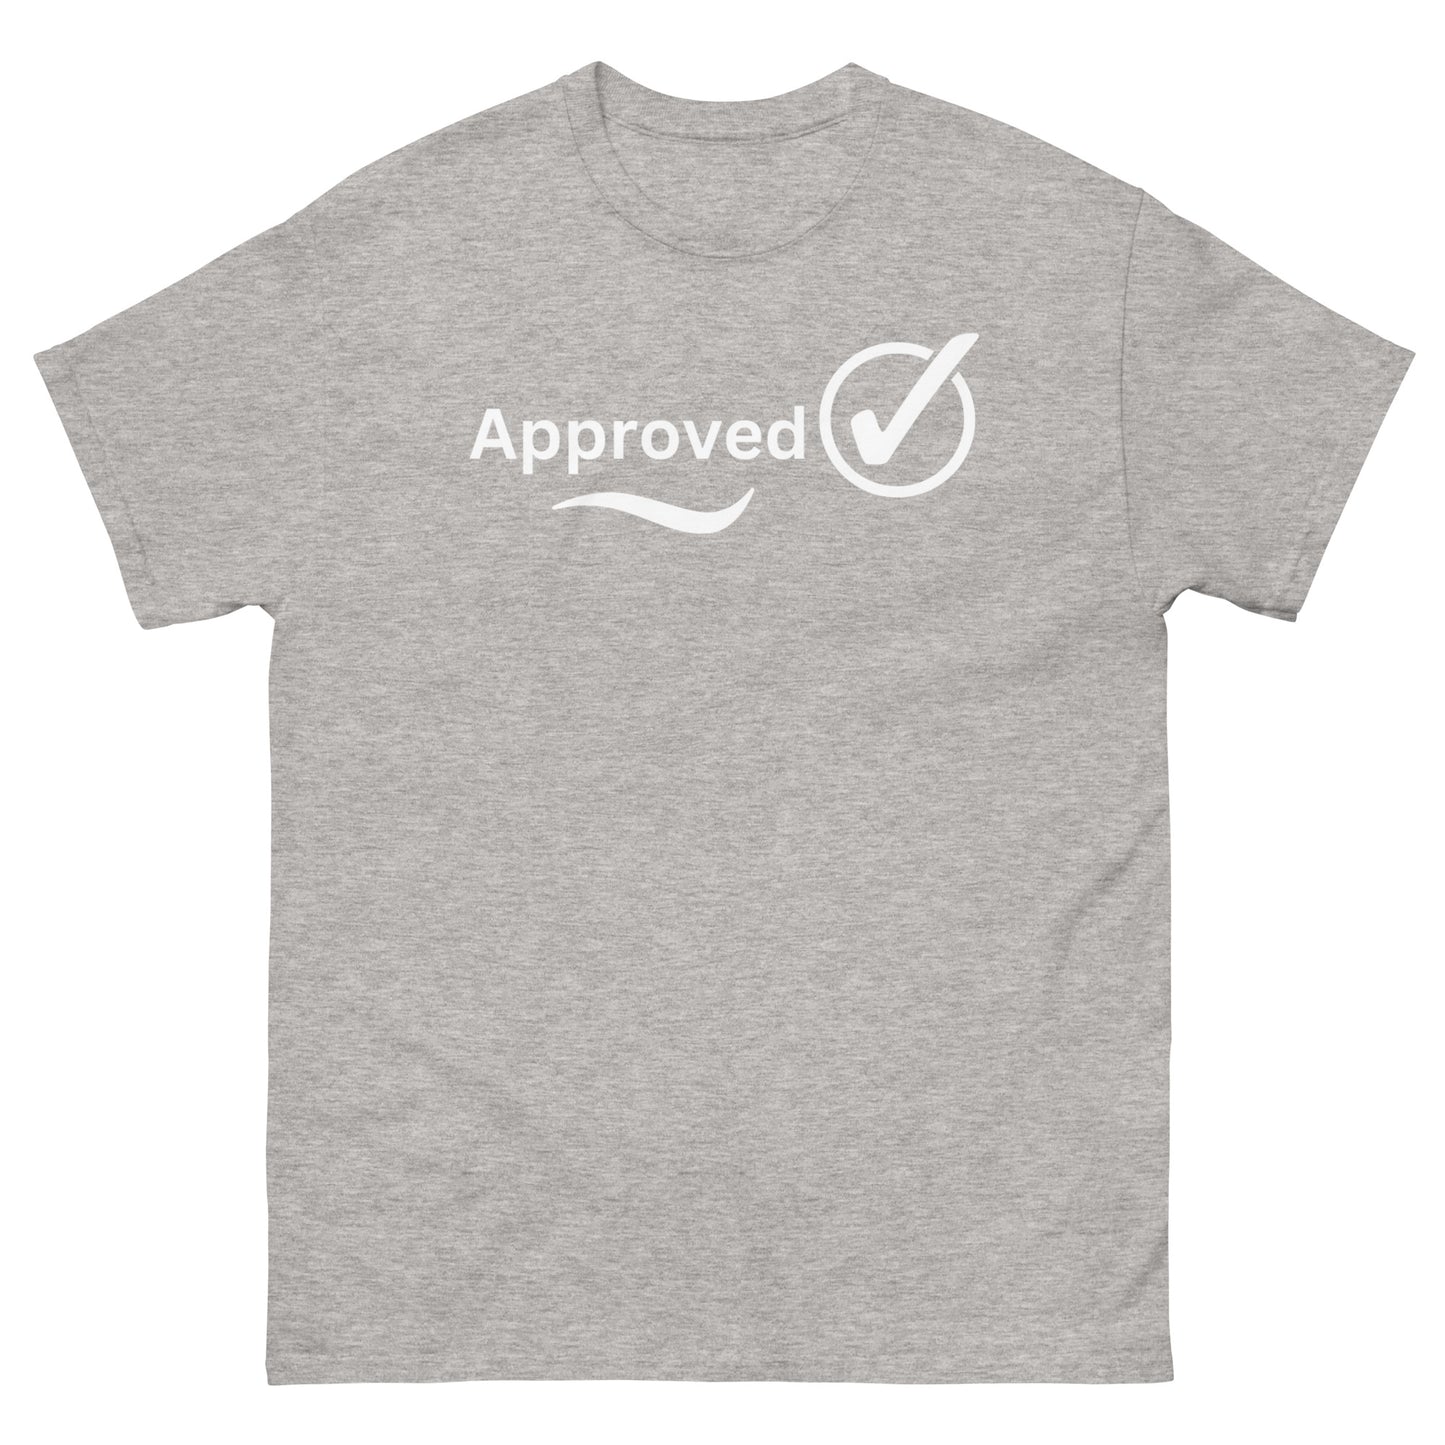 Approved T-shirt